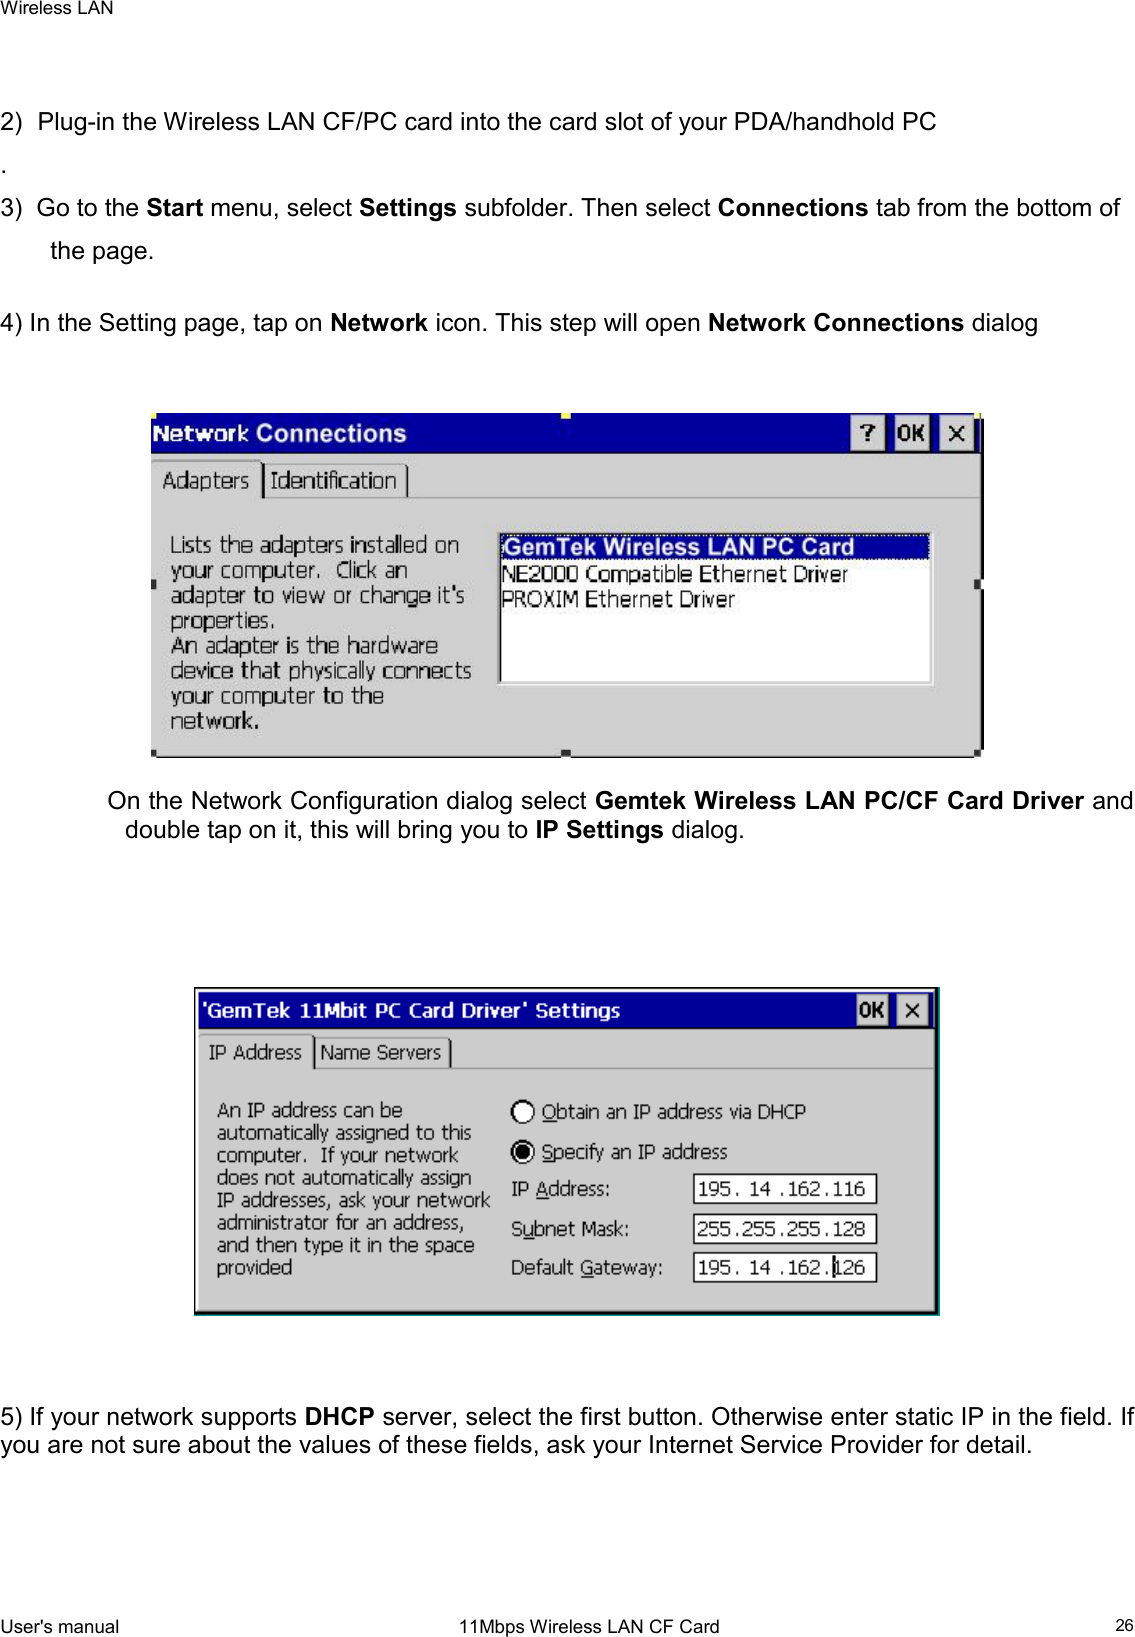 Wireless LANUser&apos;s manual                                                                 11Mbps Wireless LAN CF Card 26  2)  Plug-in the Wireless LAN CF/PC card into the card slot of your PDA/handhold PC.3)  Go to the Start menu, select Settings subfolder. Then select Connections tab from the bottom ofthe page.4) In the Setting page, tap on Network icon. This step will open Network Connections dialog On the Network Configuration dialog select Gemtek Wireless LAN PC/CF Card Driver anddouble tap on it, this will bring you to IP Settings dialog.5) If your network supports DHCP server, select the first button. Otherwise enter static IP in the field. Ifyou are not sure about the values of these fields, ask your Internet Service Provider for detail.